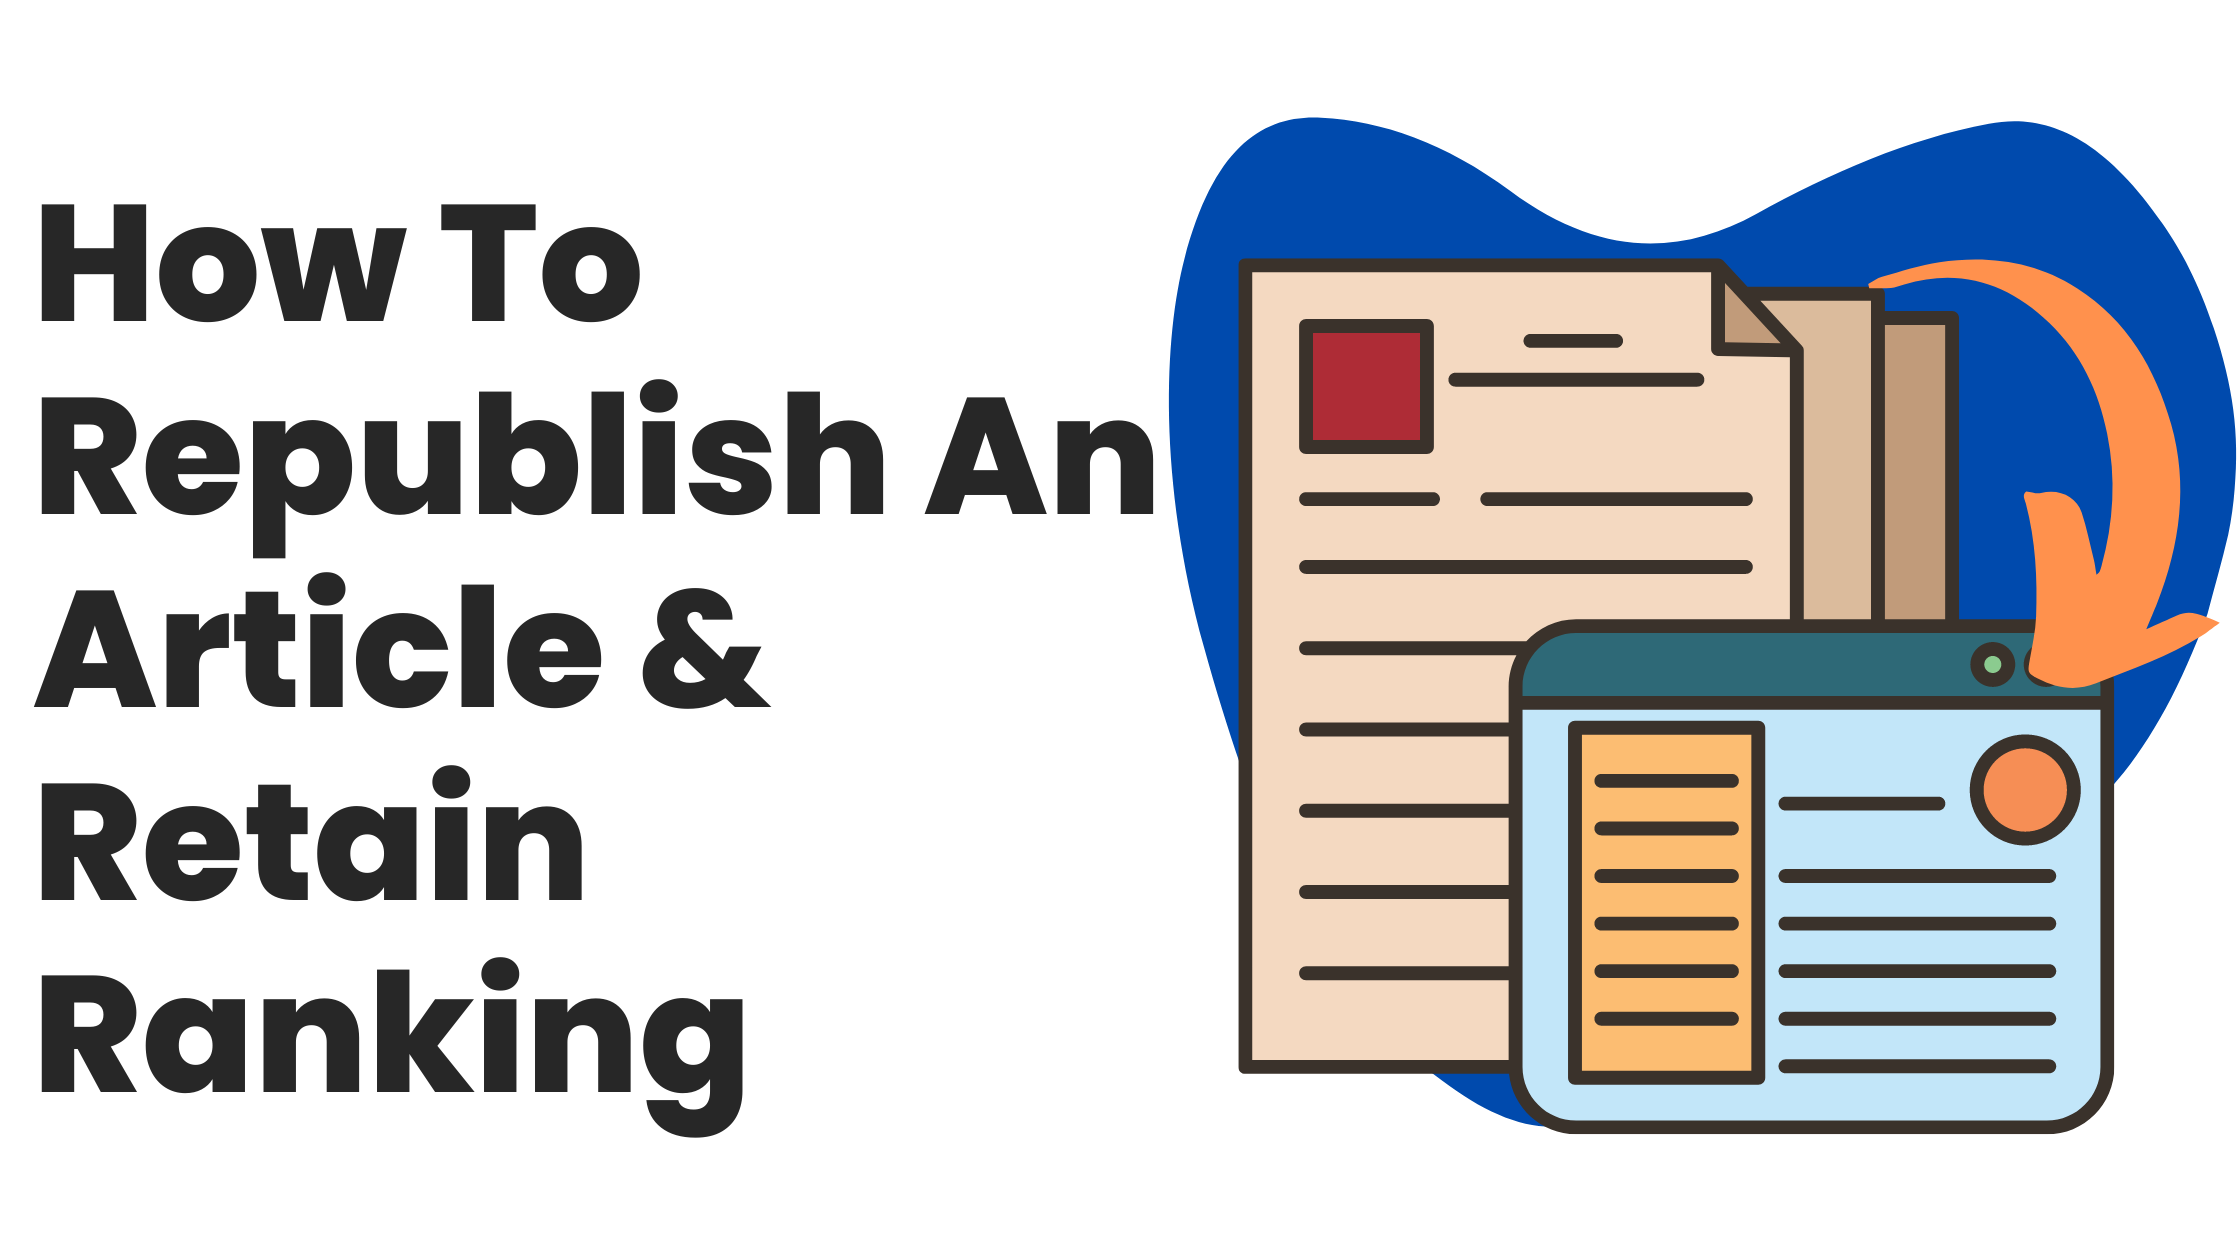 How To Republish An Article On New Blog & Retain Rankings